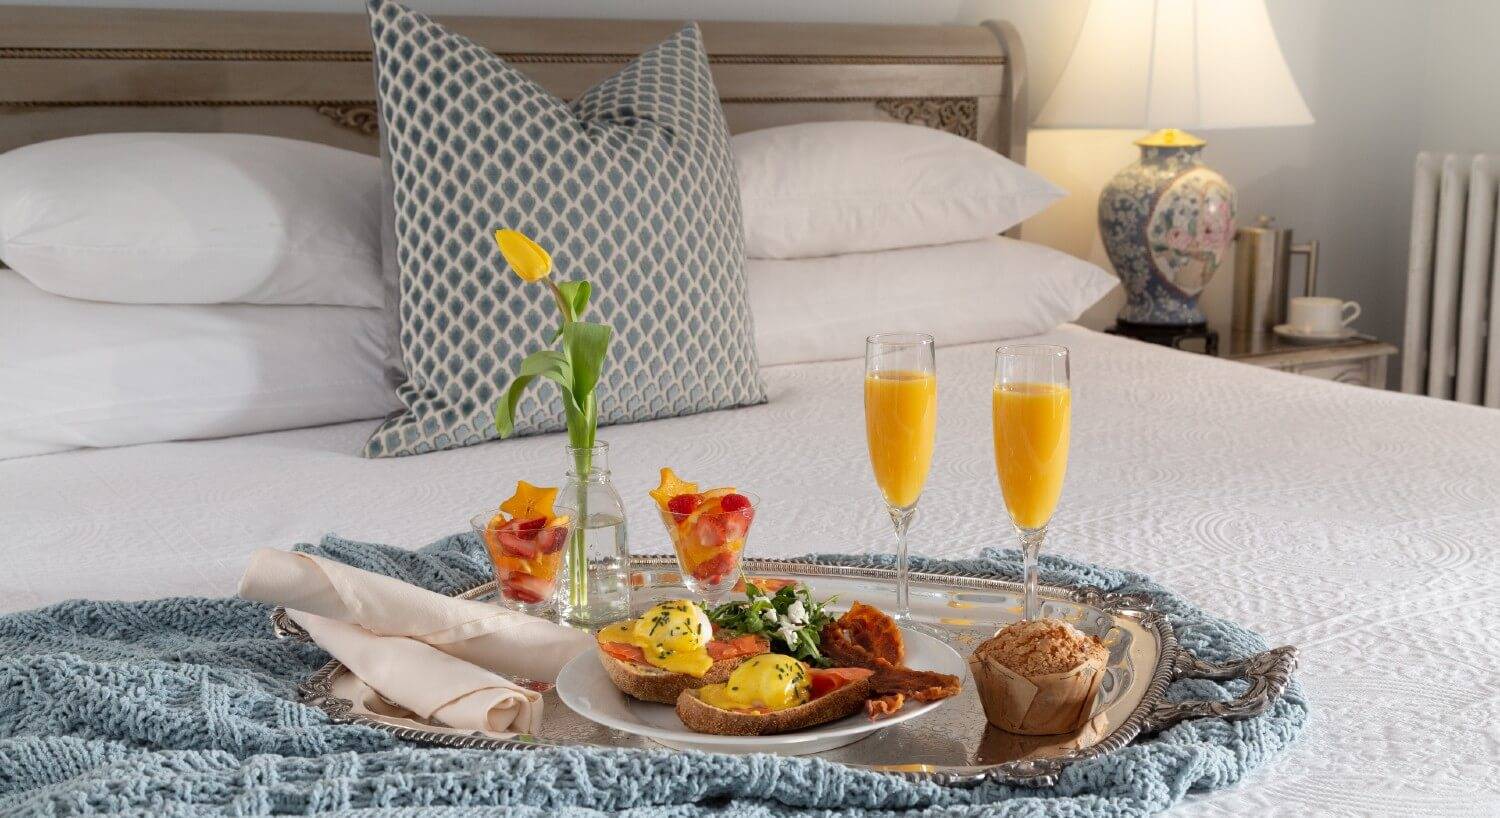 Bed with silver platter with plate of gourmet breakfast, fruit cups, muffin and two glasses of orange juice